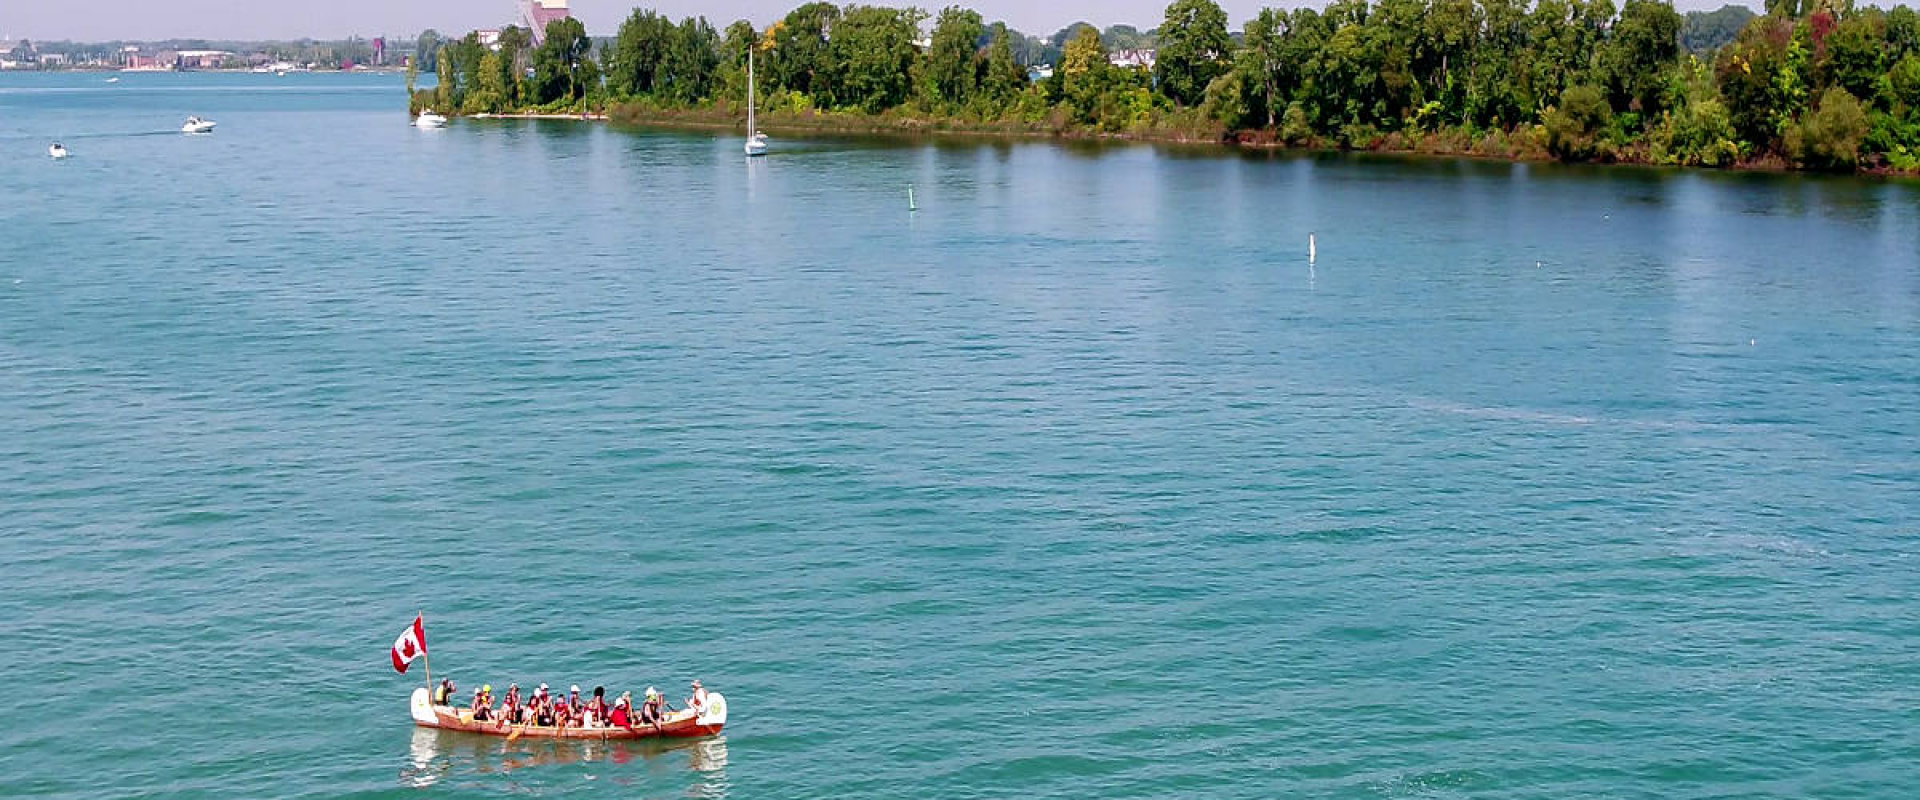 A voyageur canoe carries paddlers across the Detroit River in the foreground of Peche Island on a clear day.